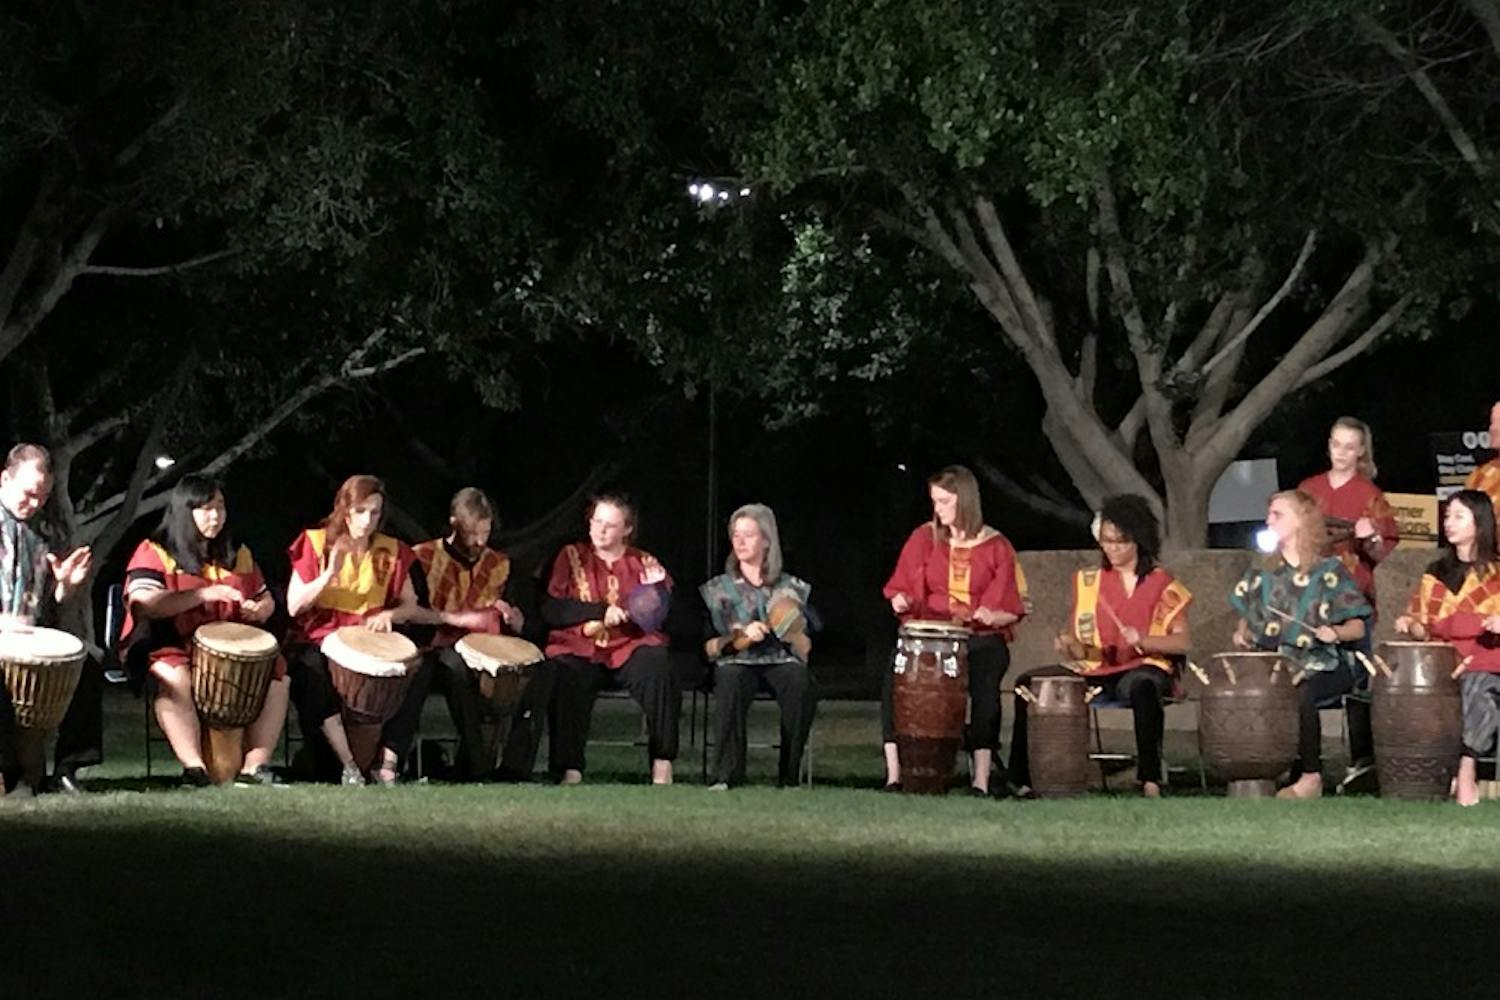 The ASU Drum Ensemble performs traditional music from&nbsp;Ghana on&nbsp;ASU's Tempe campus on&nbsp;Monday, April 24, 2017.